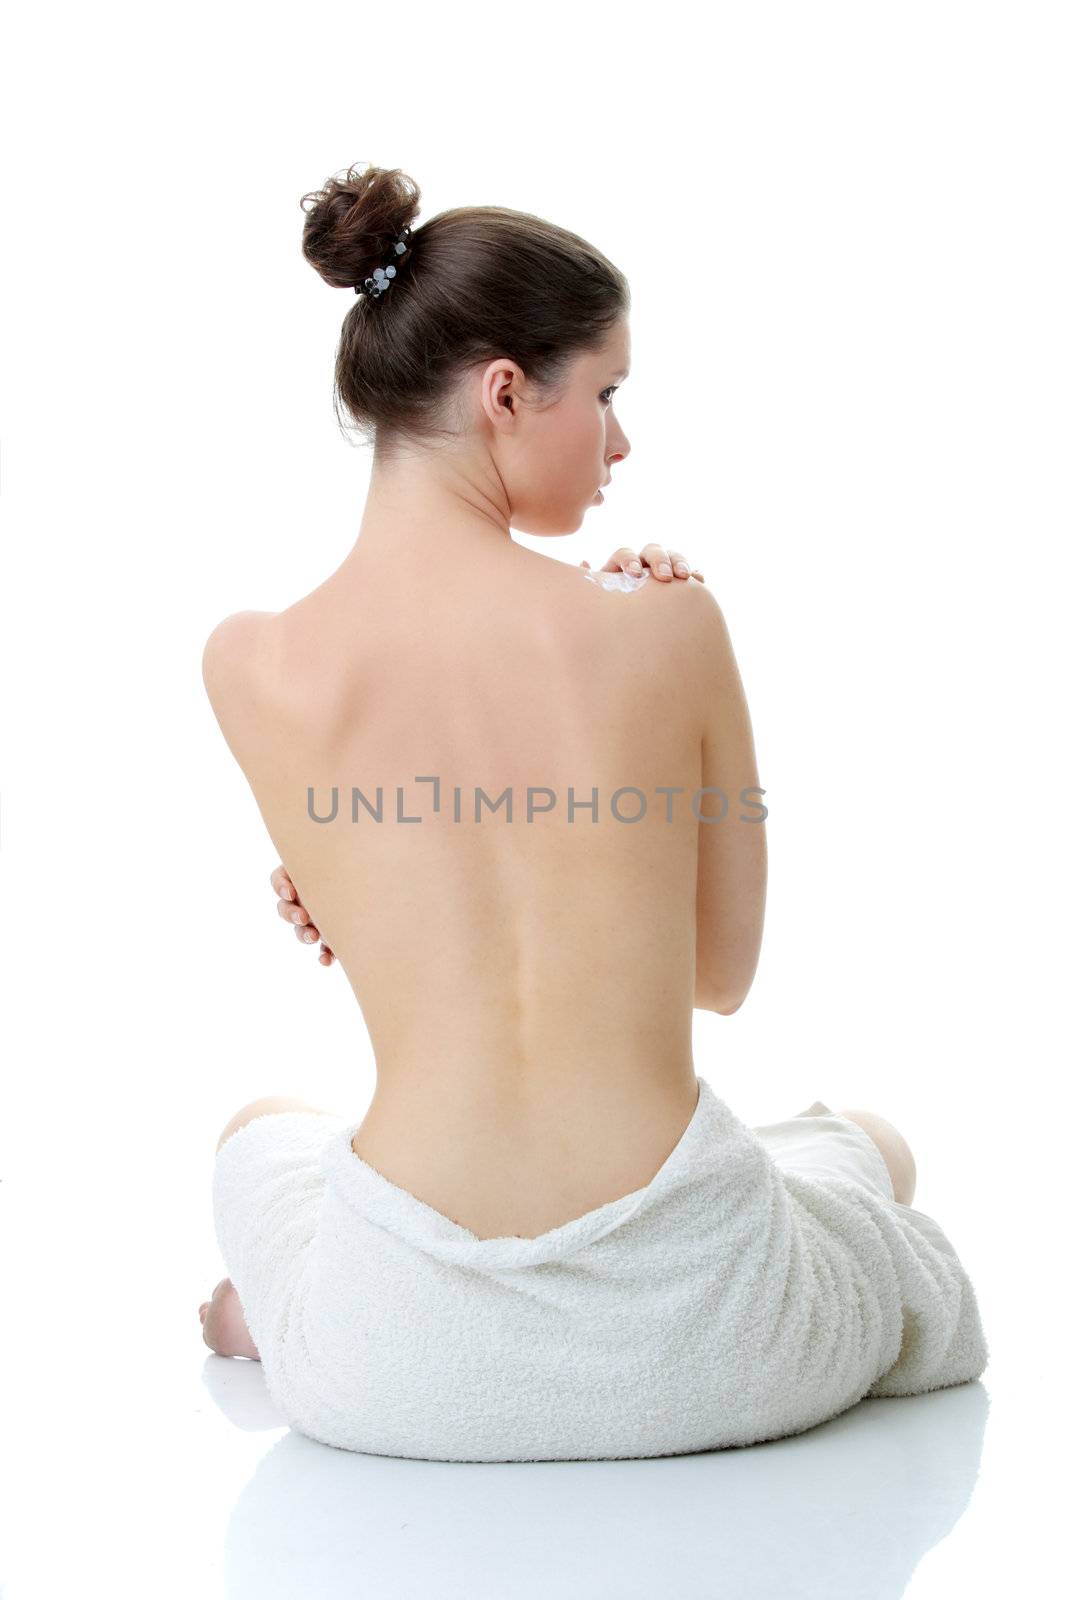 Skincare concept: back of beautiful nude woman with soft skin putting skincare product (cream) on her back